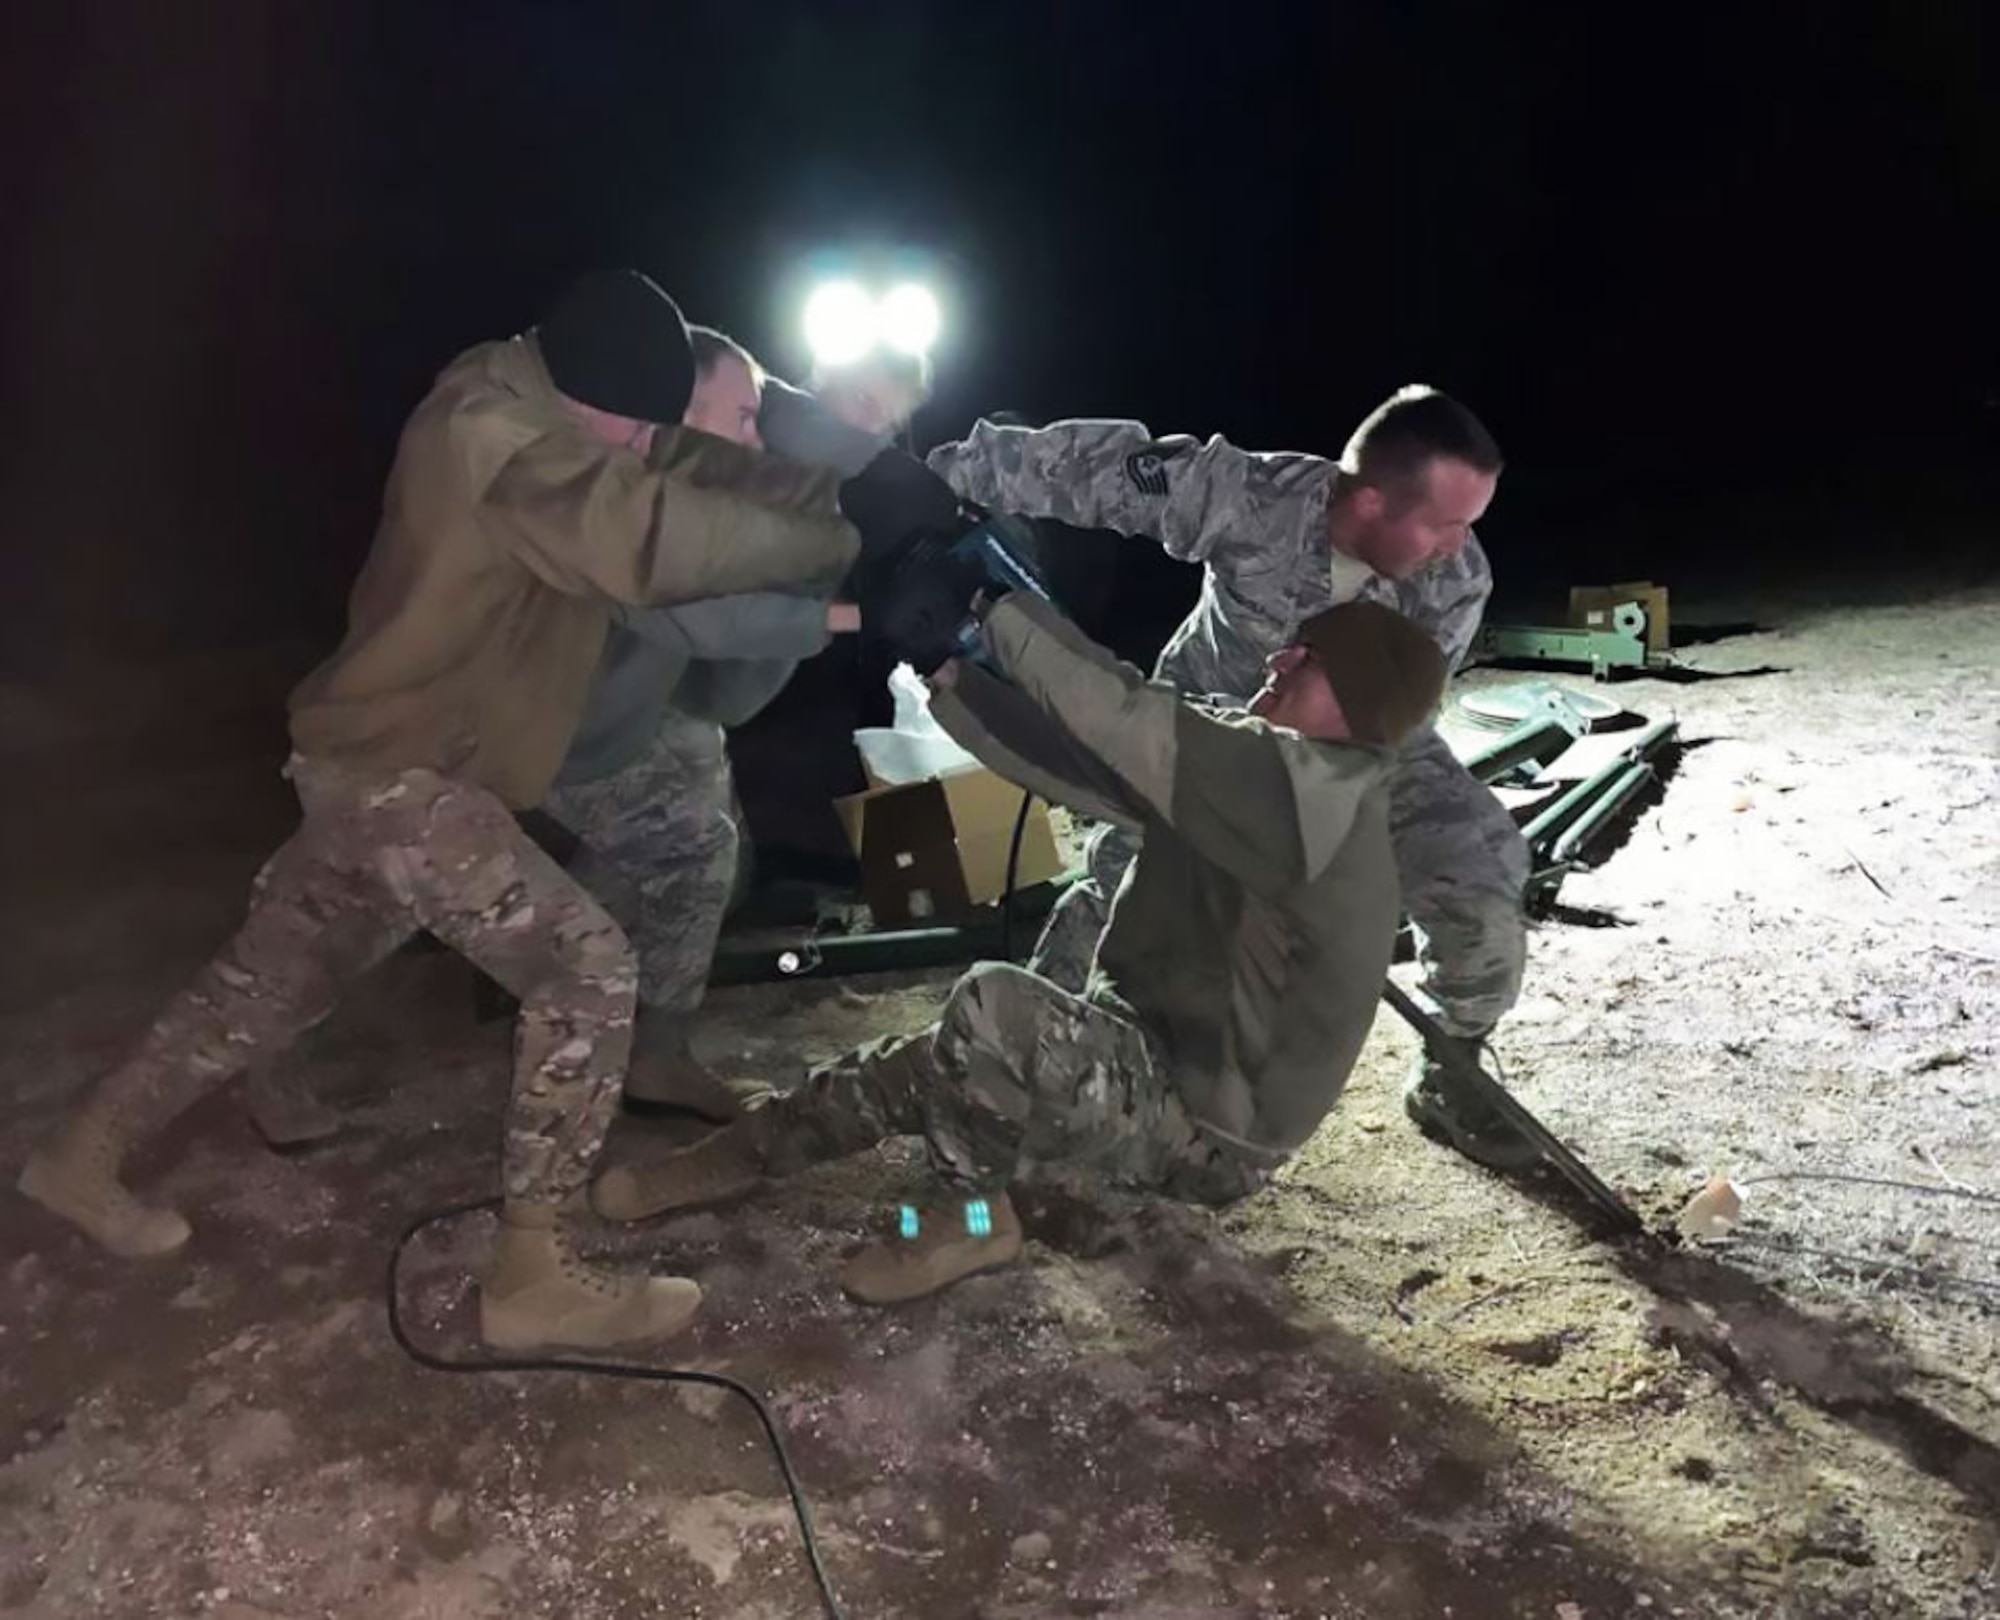 Airmen from the 726th Air Control Squadron drive 99 feet of copper grounding rods and 7,000 feet of electrical cabling into the Nevada soil in less than 72 hours. This preparation was needed to set up the Tactical Operations and Control and Reporting Centers so the TYQ-23A could be fully integrated at Red Flag 19-02. (Courtesy photo).